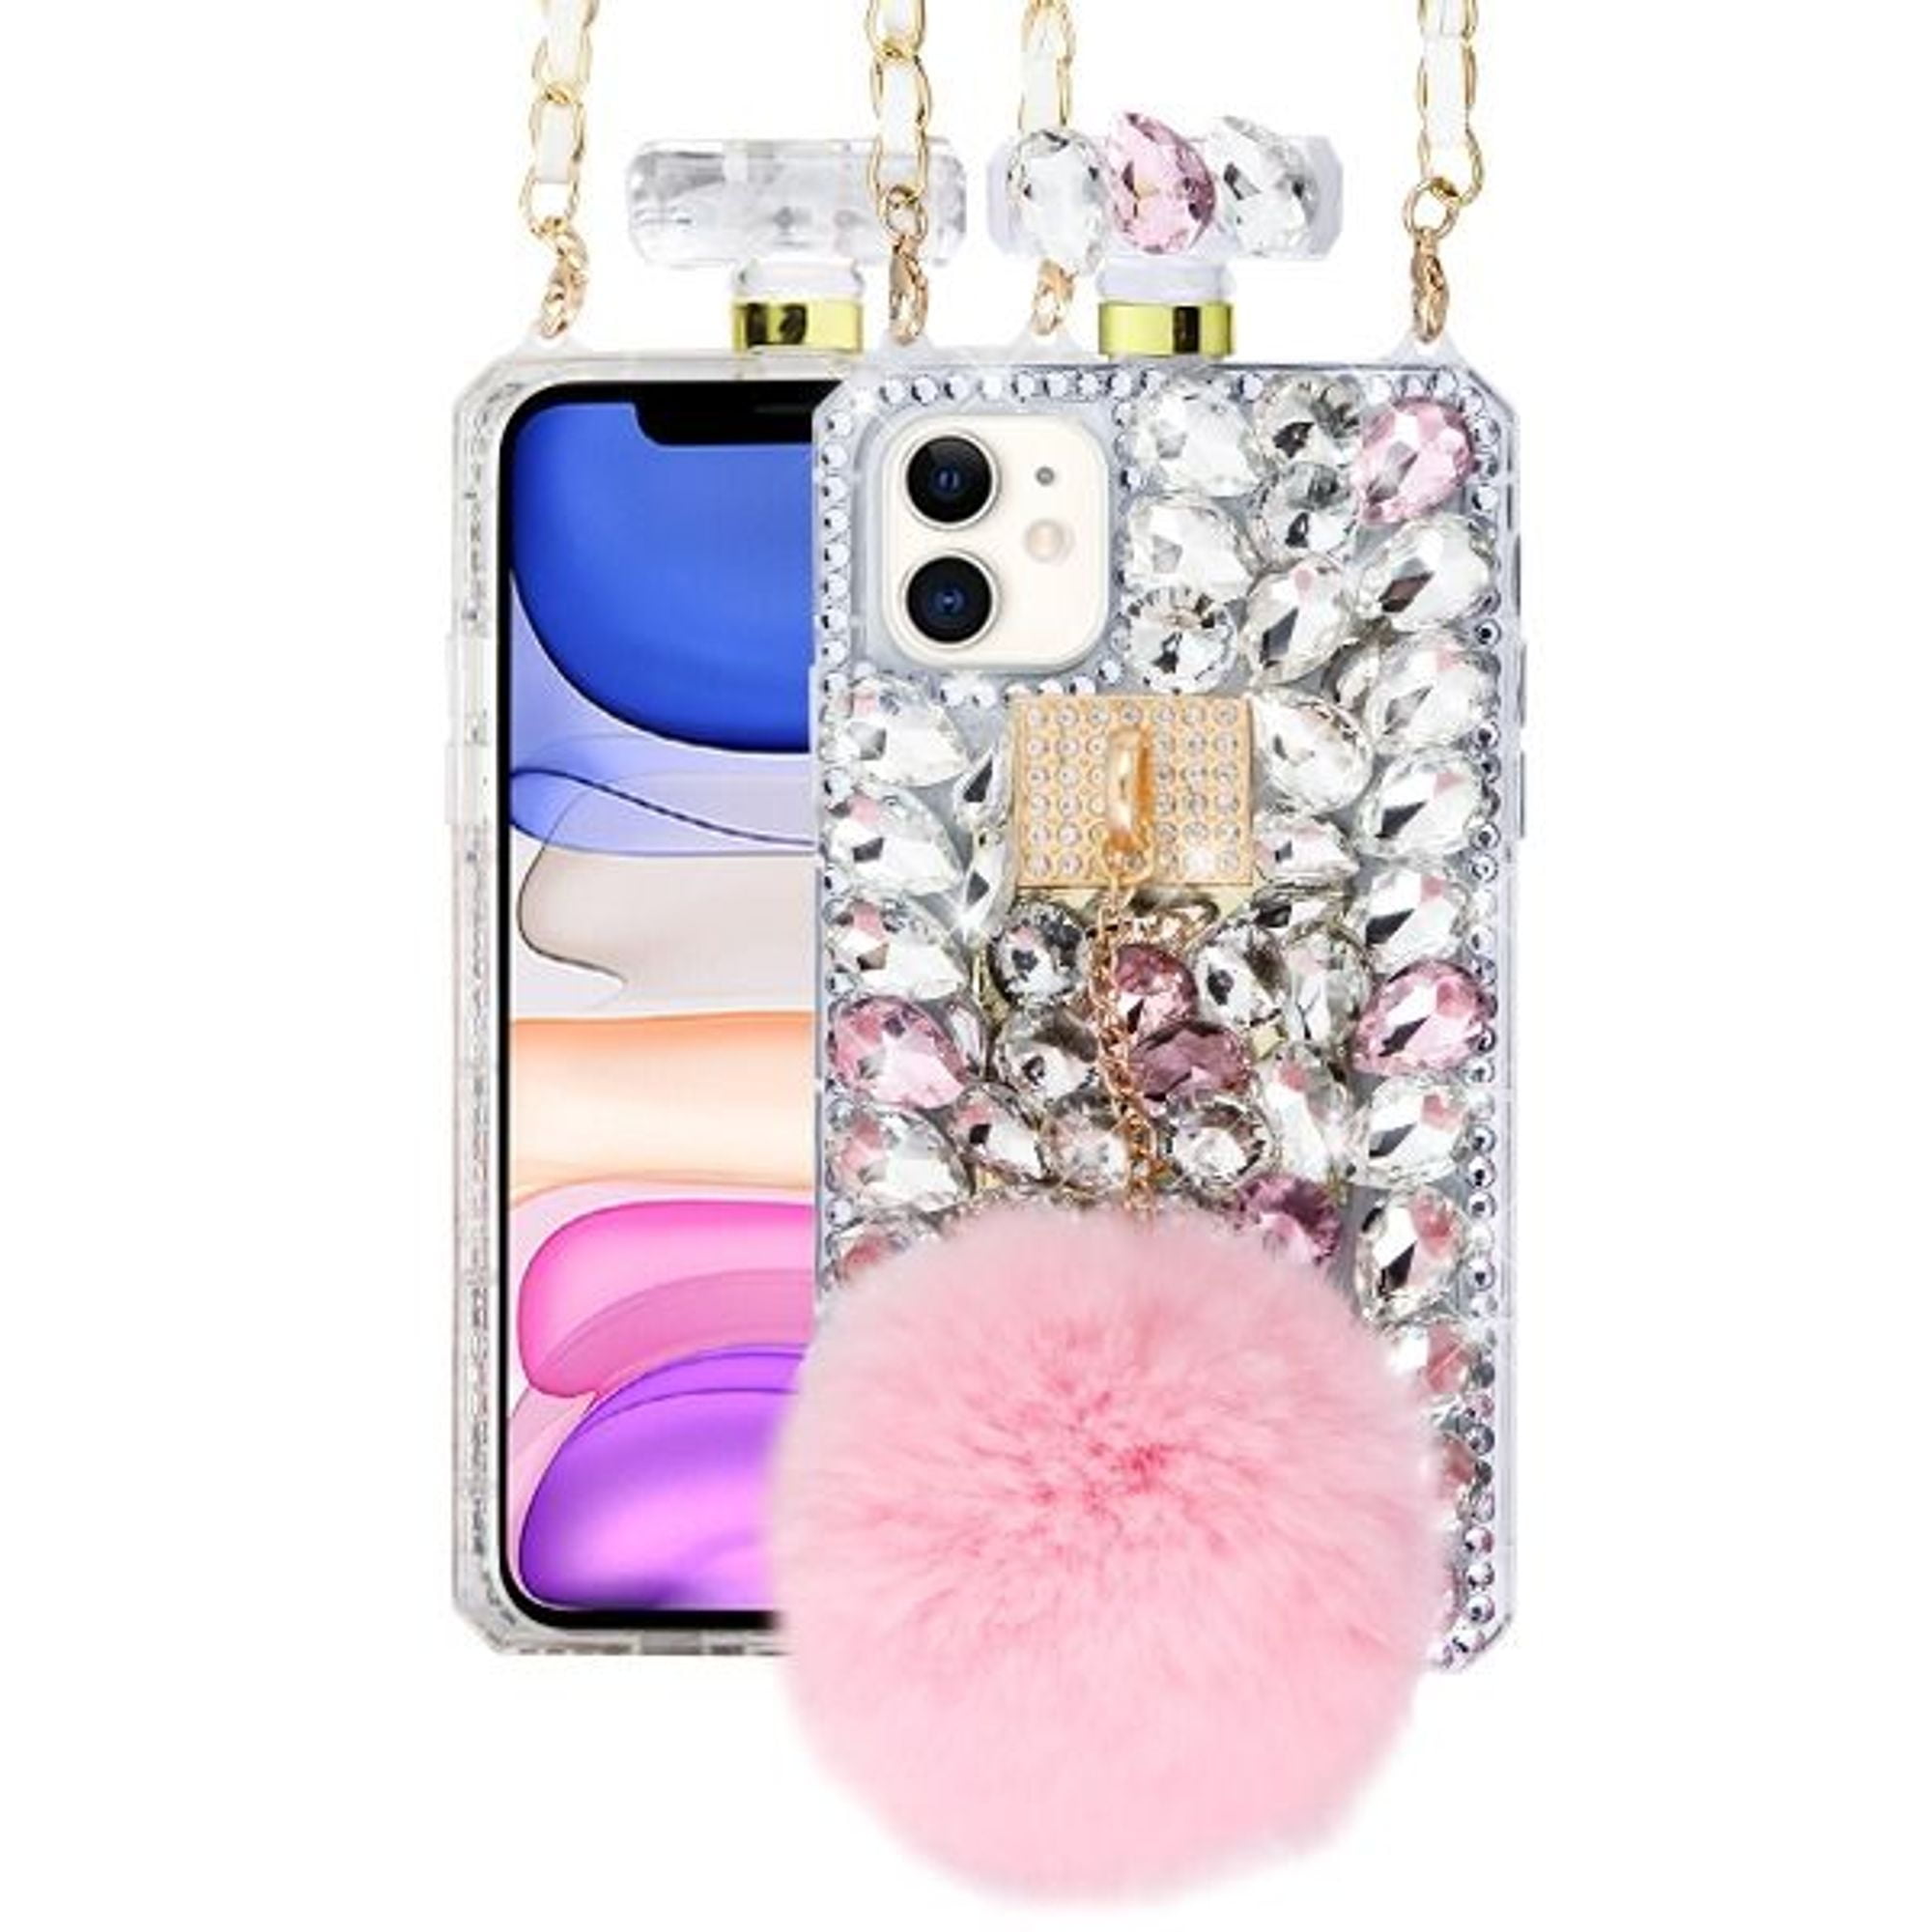 For Apple Iphone 11 Case By Insten Cute Plush With Chain Perfume Bottle Hard Snap In W Diamond Compatible Apple Iphone 11 Walmart Com Walmart Com